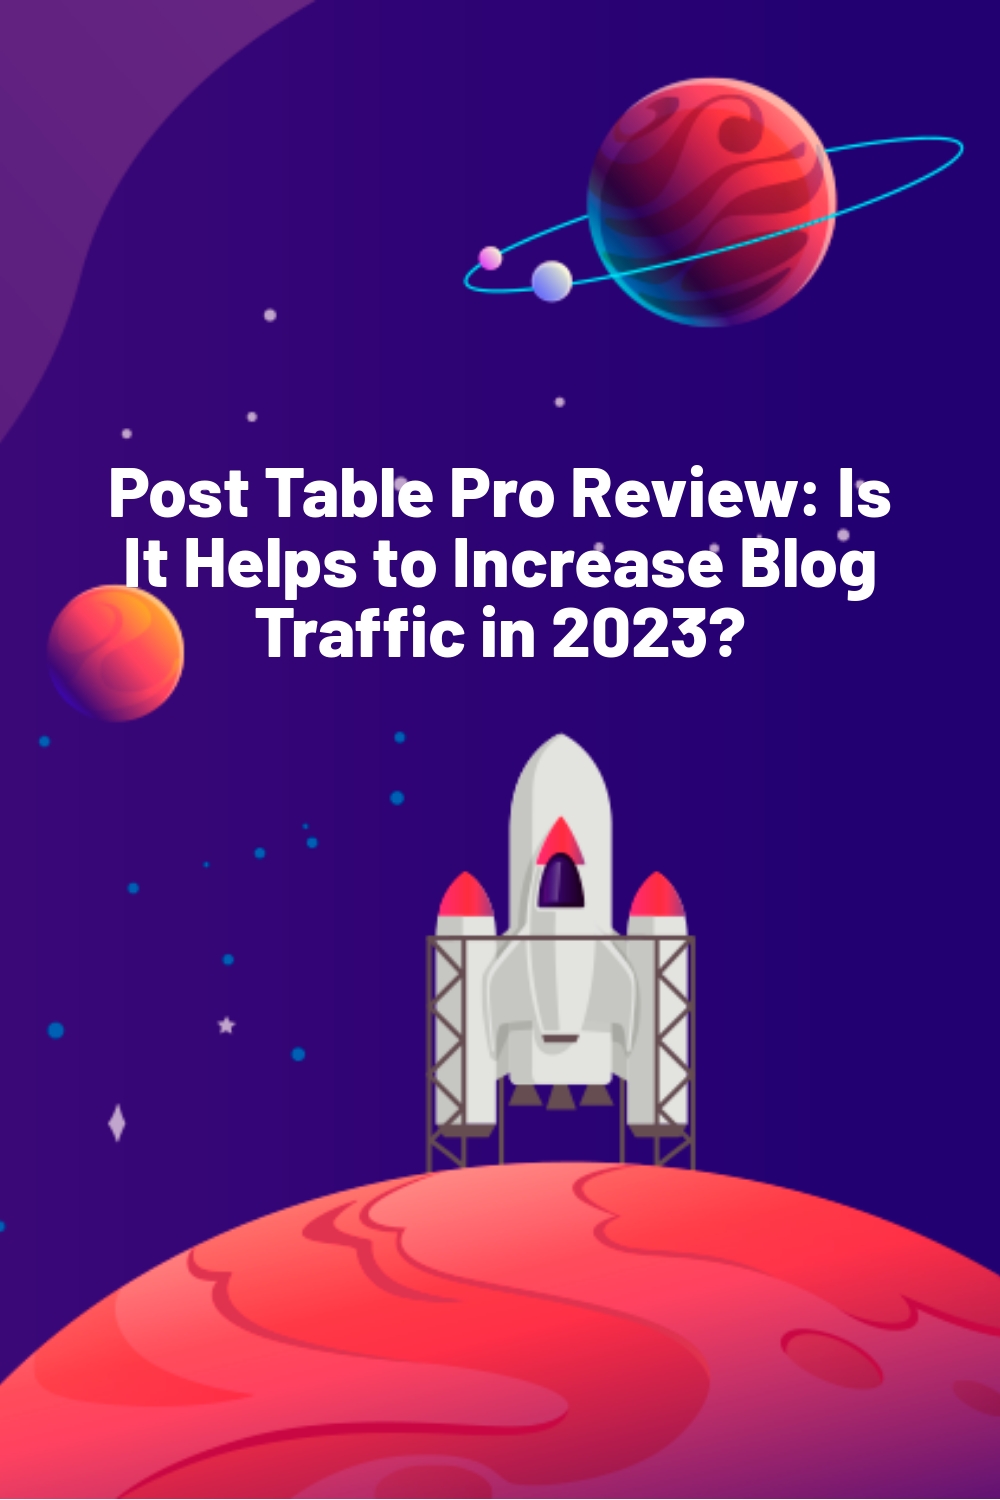 Post Table Pro Review: Is It Helps to Increase Blog Traffic in 2023?